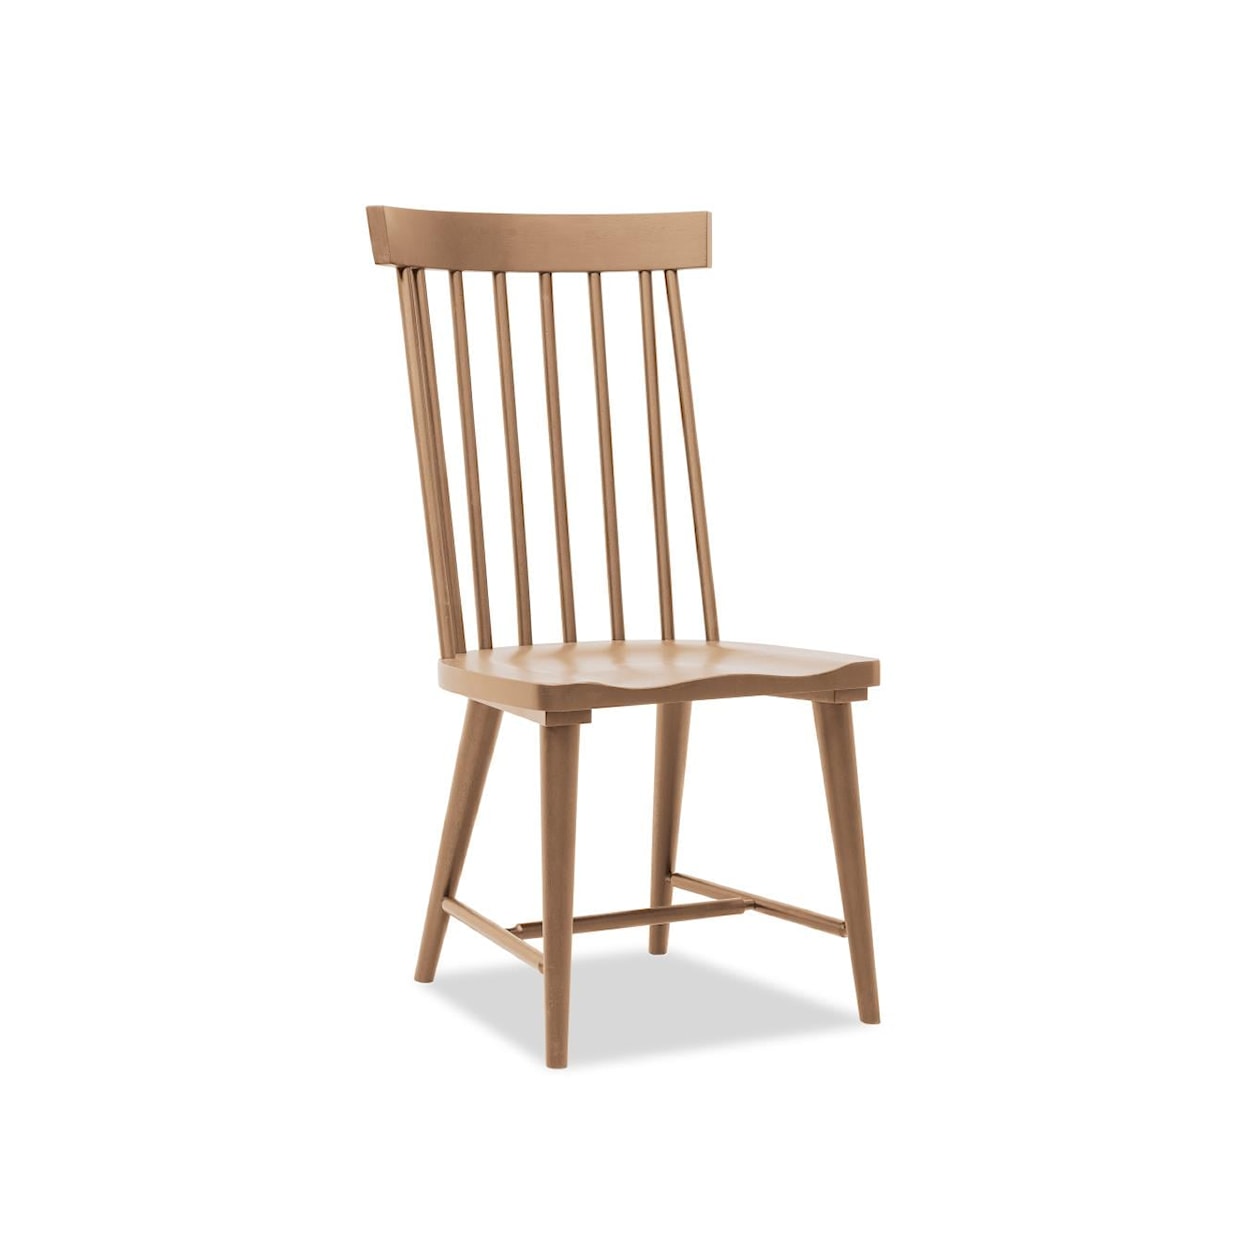 Trisha Yearwood Home Collection by Legacy Classic Today's Traditions Windsor Chair